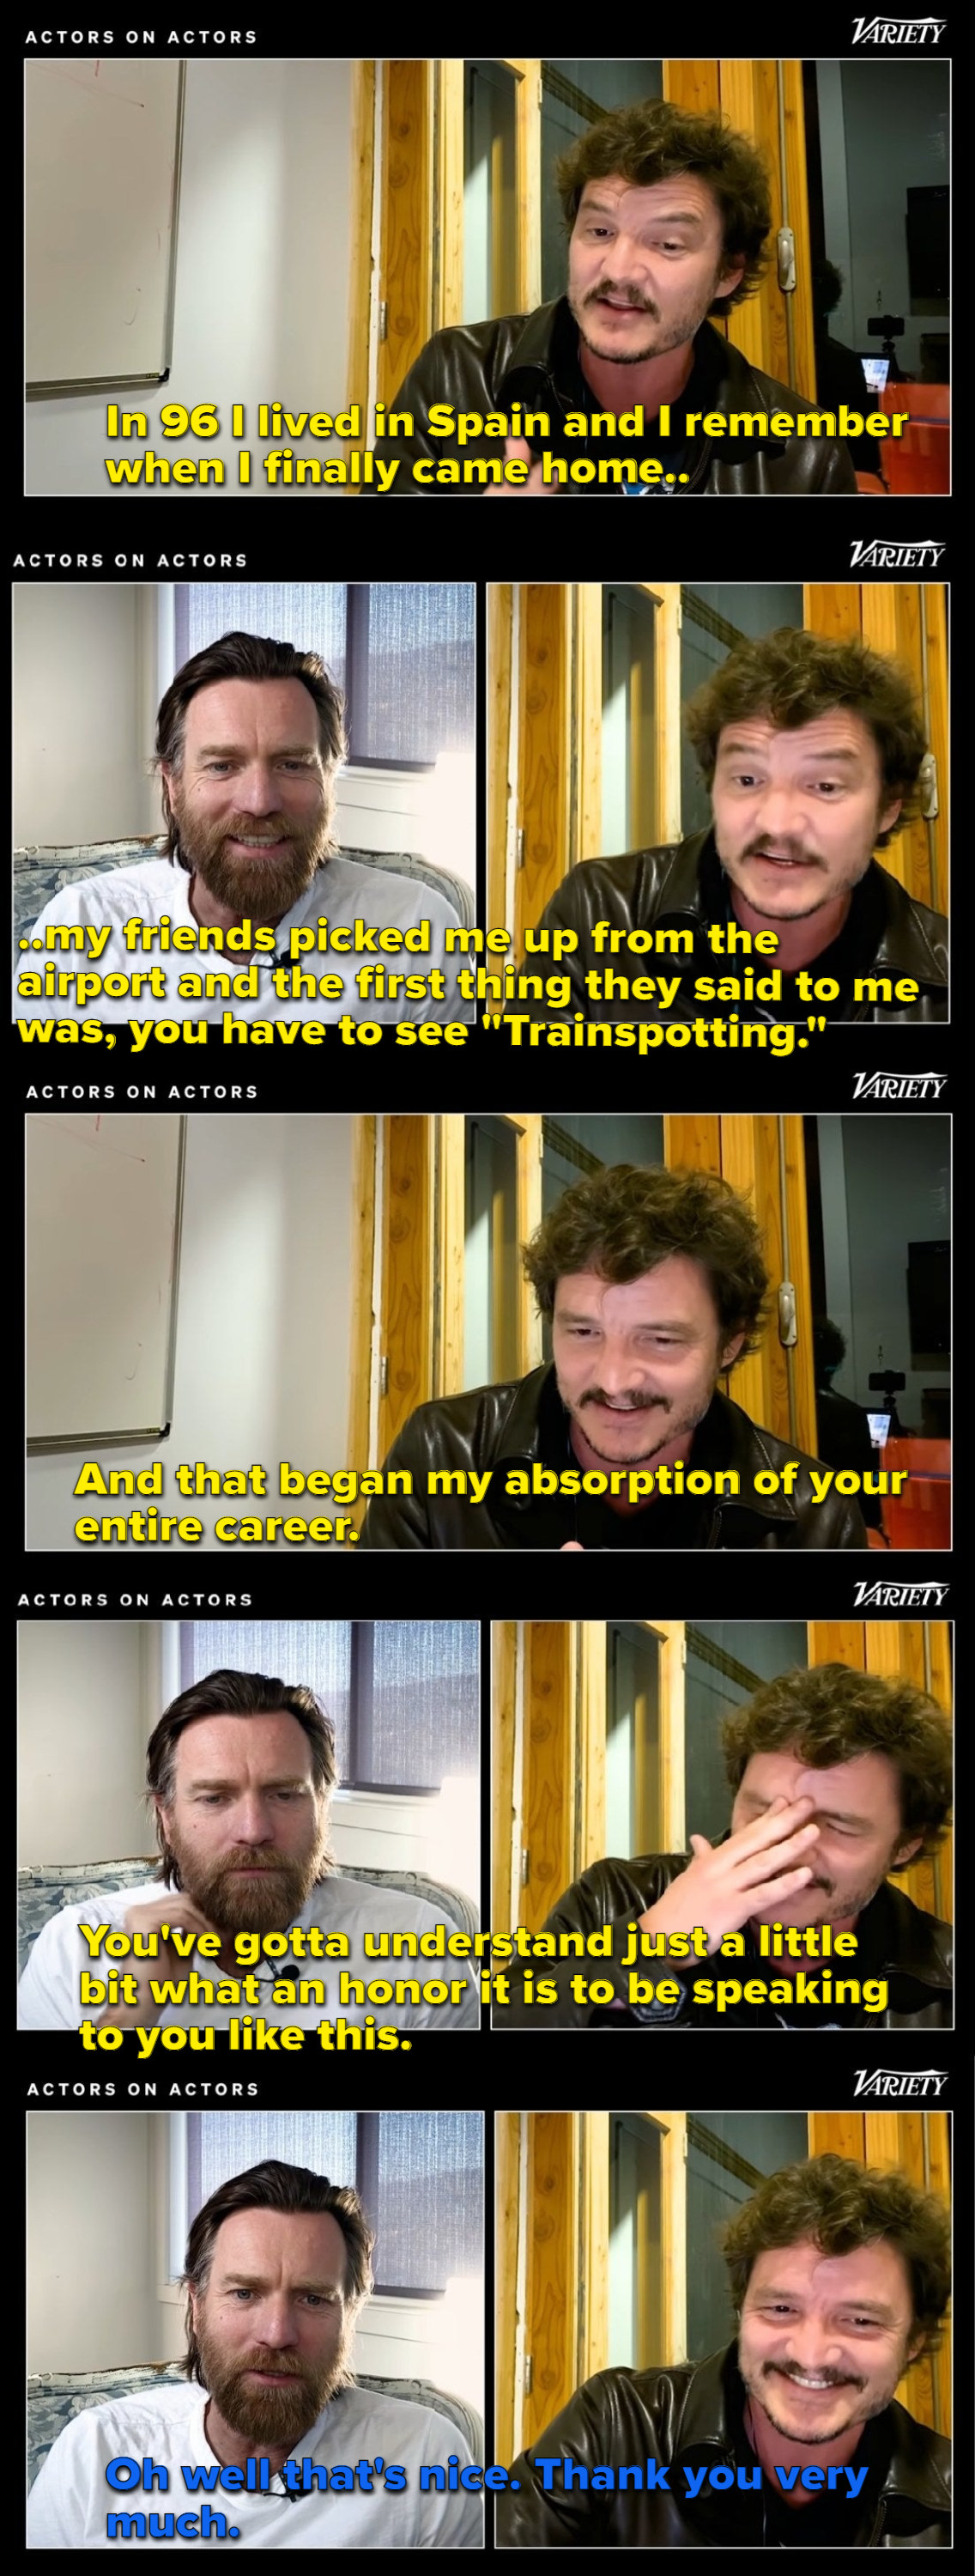 Pedro Pascal speaking to Ewan McGregor about how he had first heard of his work